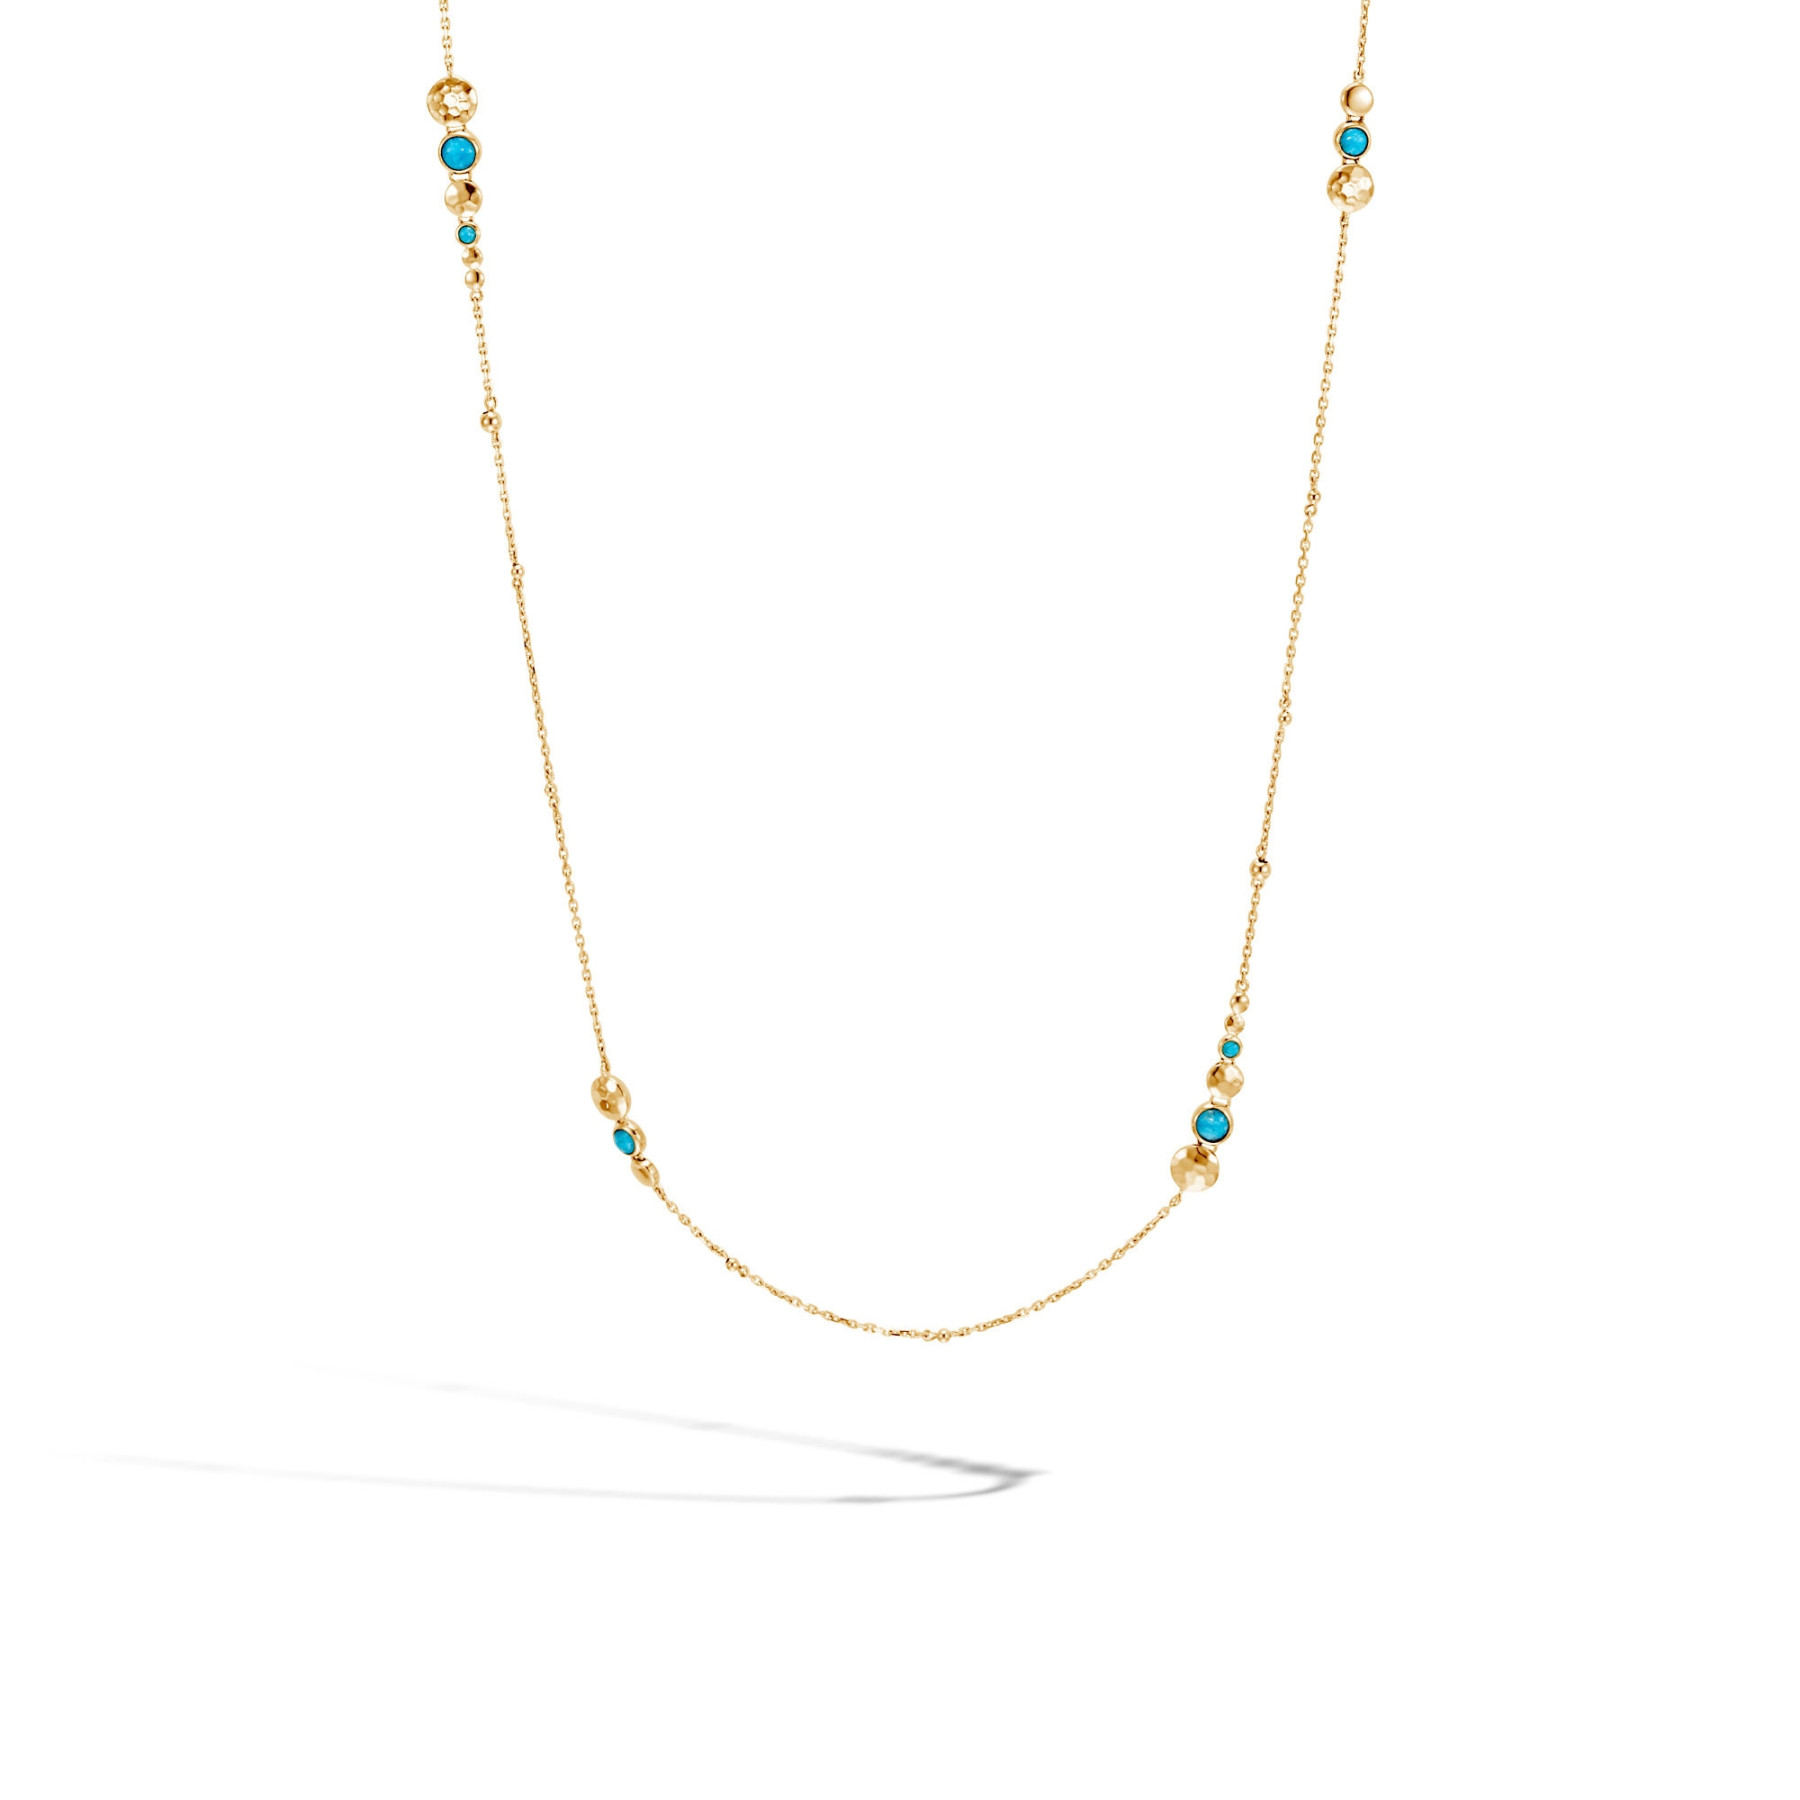 John Hardy Dot Turquoise Station Necklace in 18k Yellow Gold close up